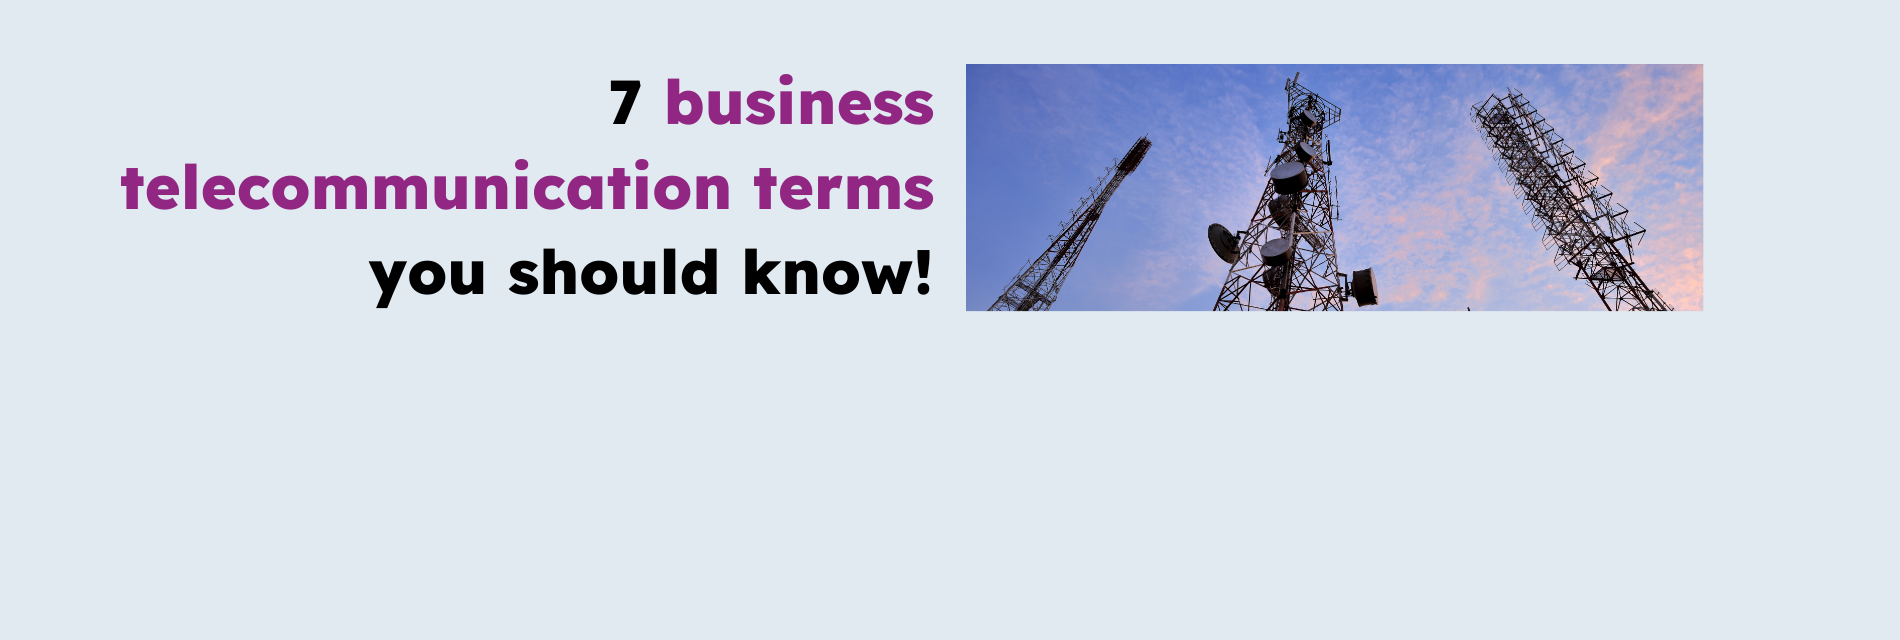 7 business telecommunications terms